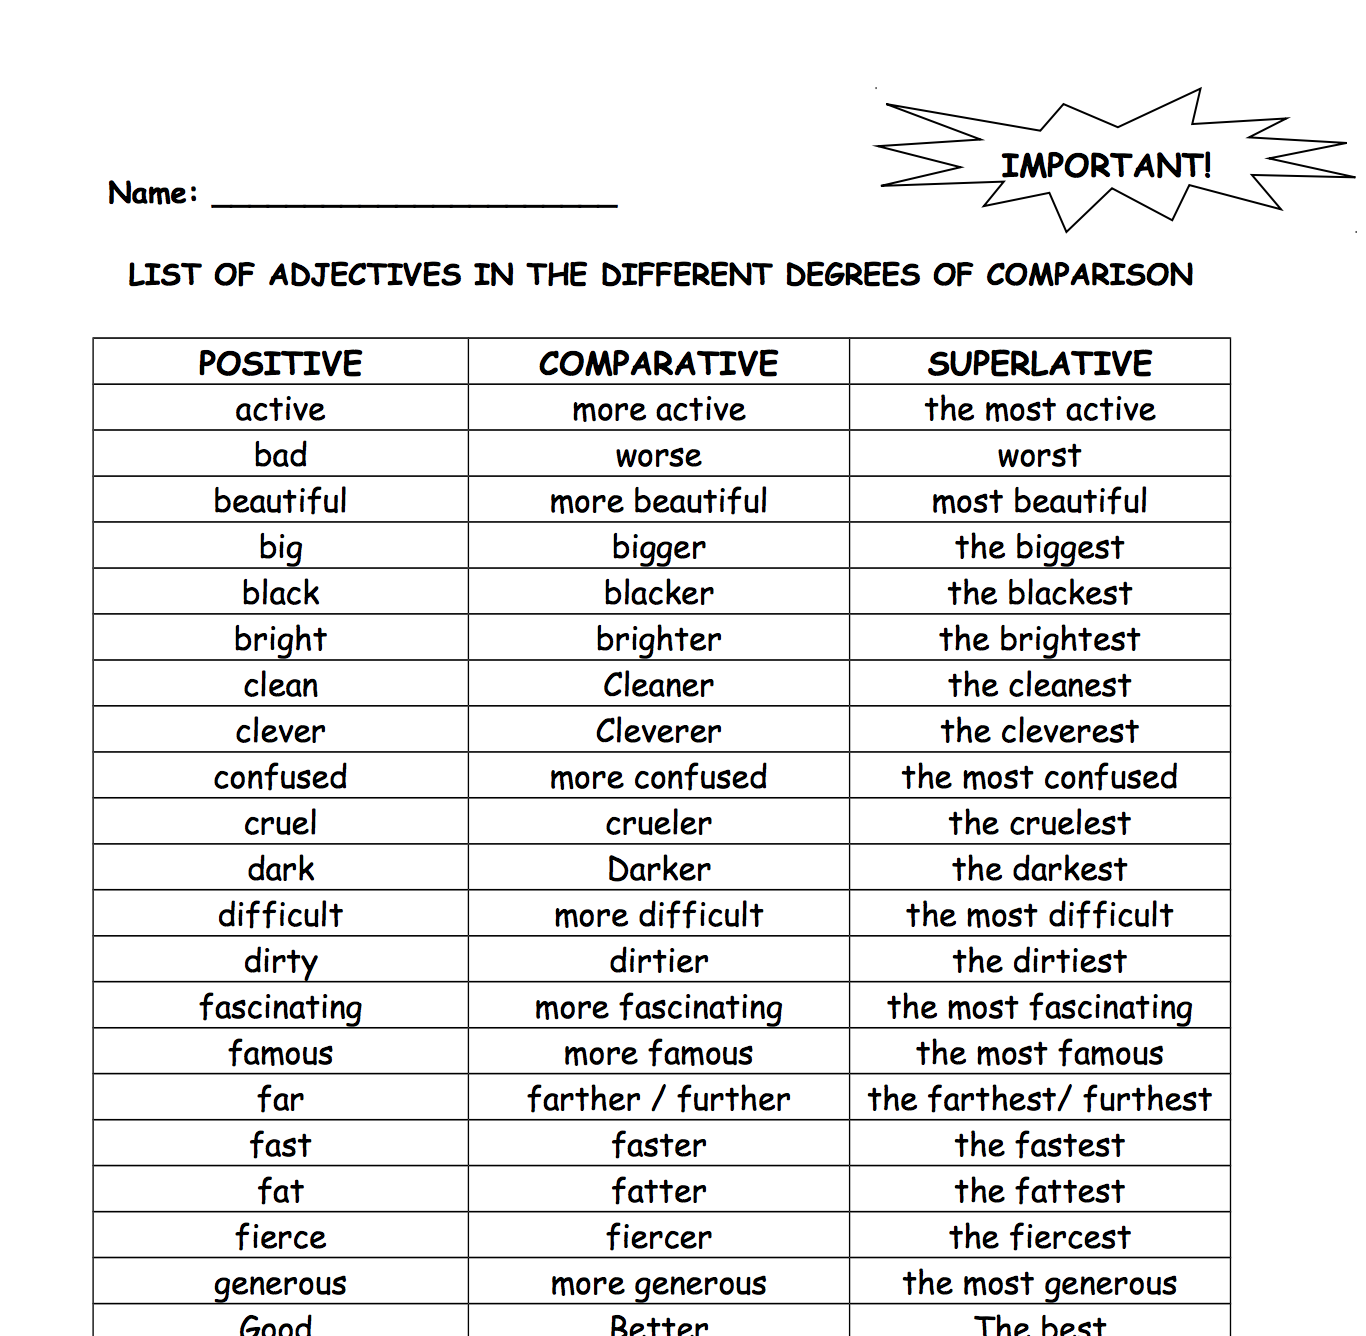 degrees-of-comparison-of-adjectives-and-adverbs-exercises-online-degrees